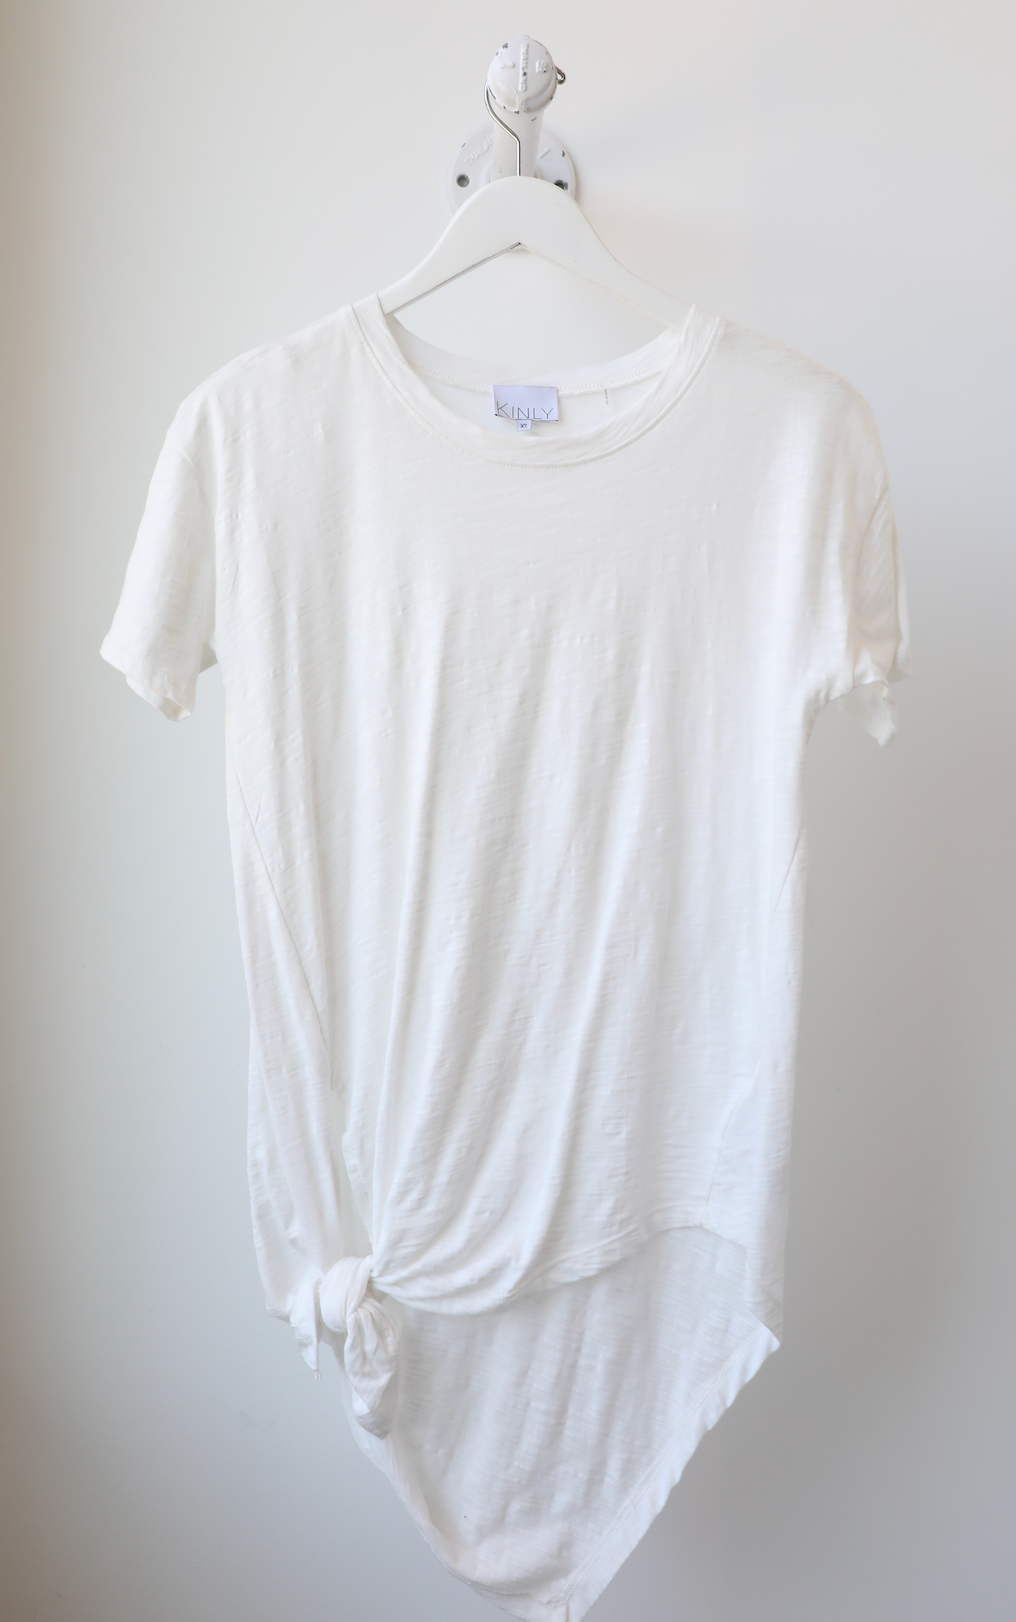 Kinly - Two Way Asymm Tee